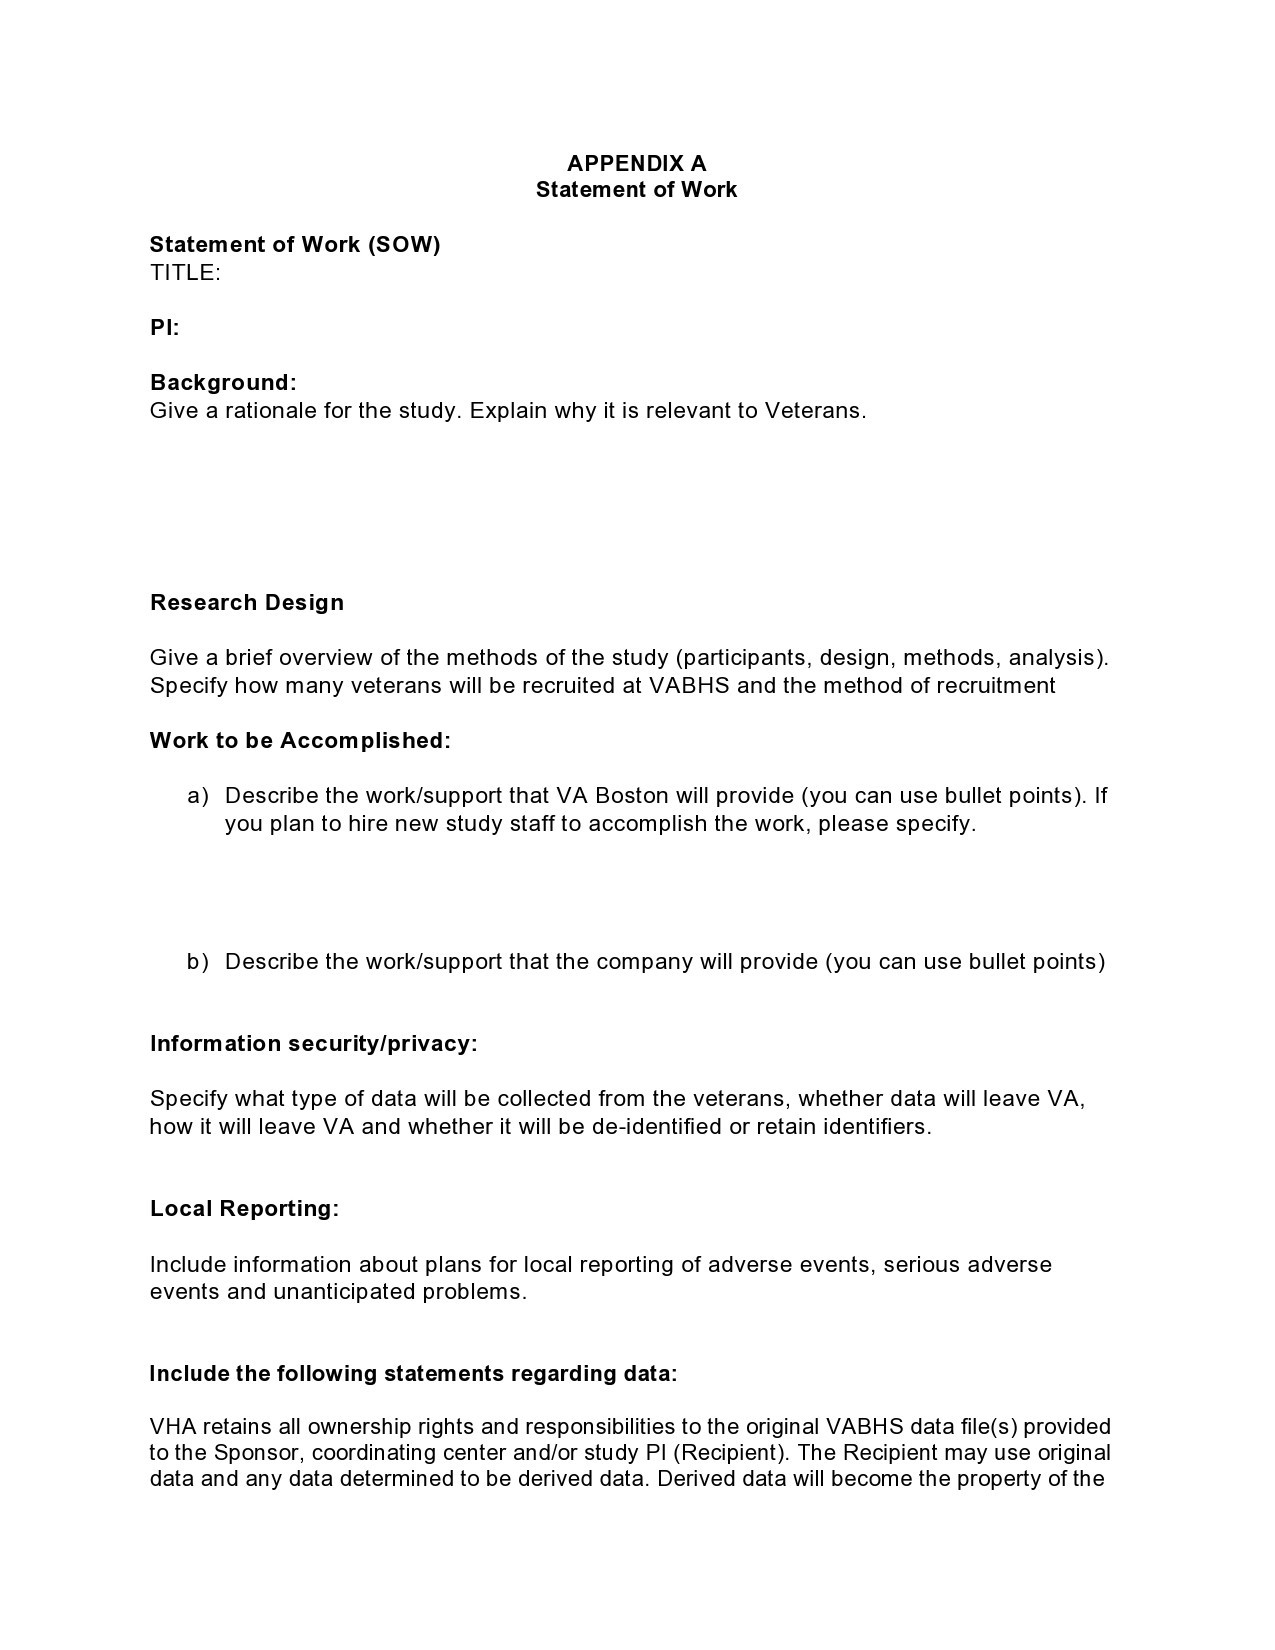 Free statement of work template 33